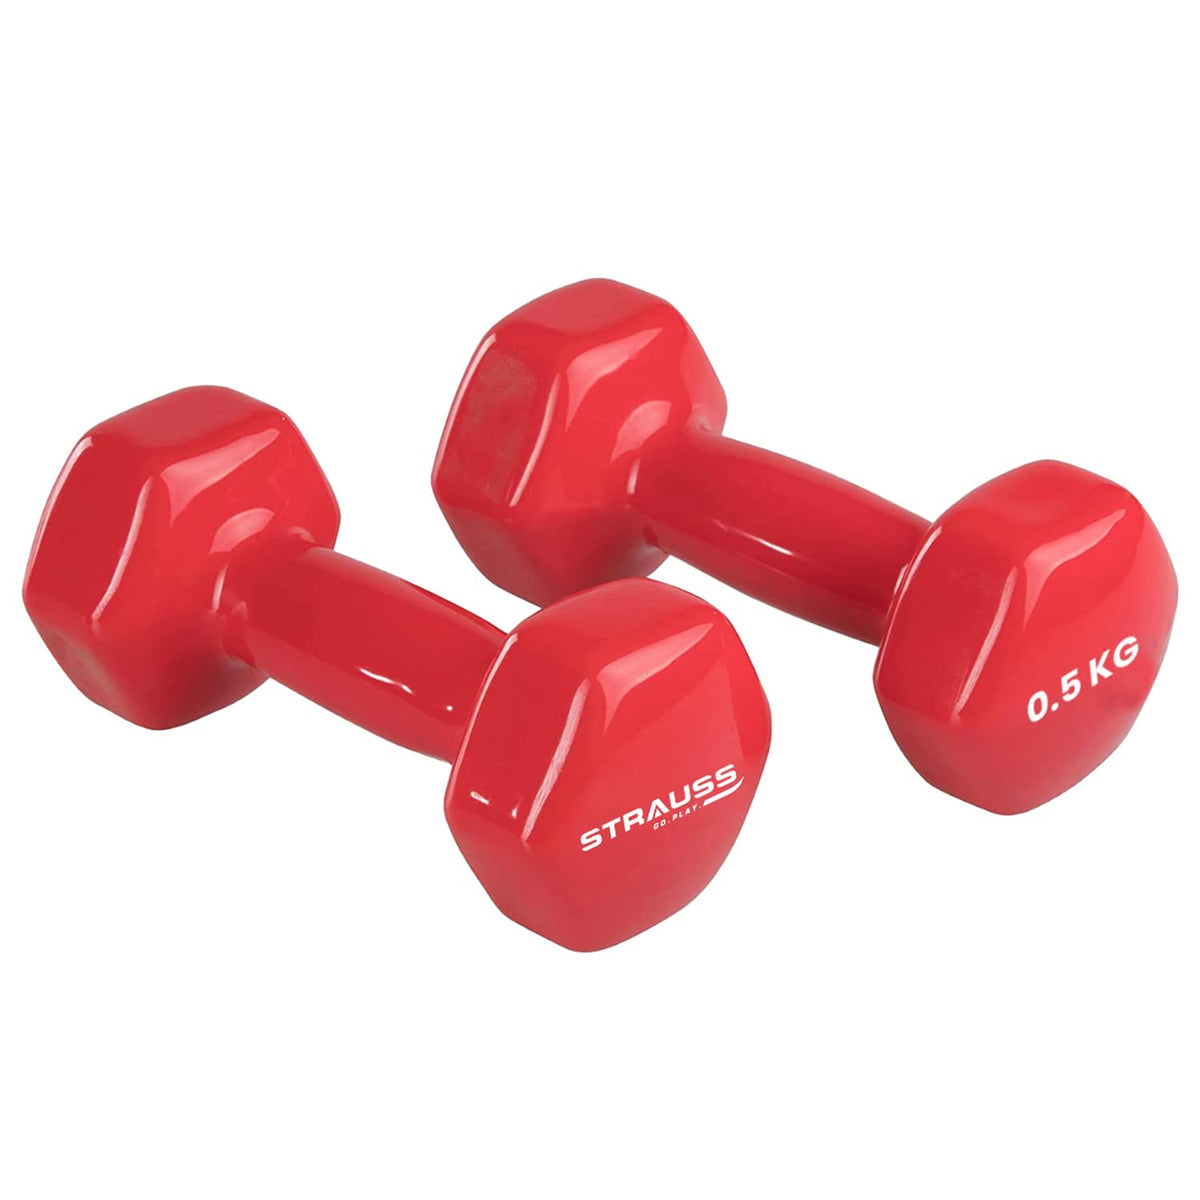 Strauss Premium Vinyl Dumbbells Weight for Men & Women | 1.5 Kg (Each) | 3 Kg (Pair) | Ideal for Home Workout, Yoga, Pilates, Gym Exercises | Non-Slip, Easy to Hold, Scratch Resistant (Red)